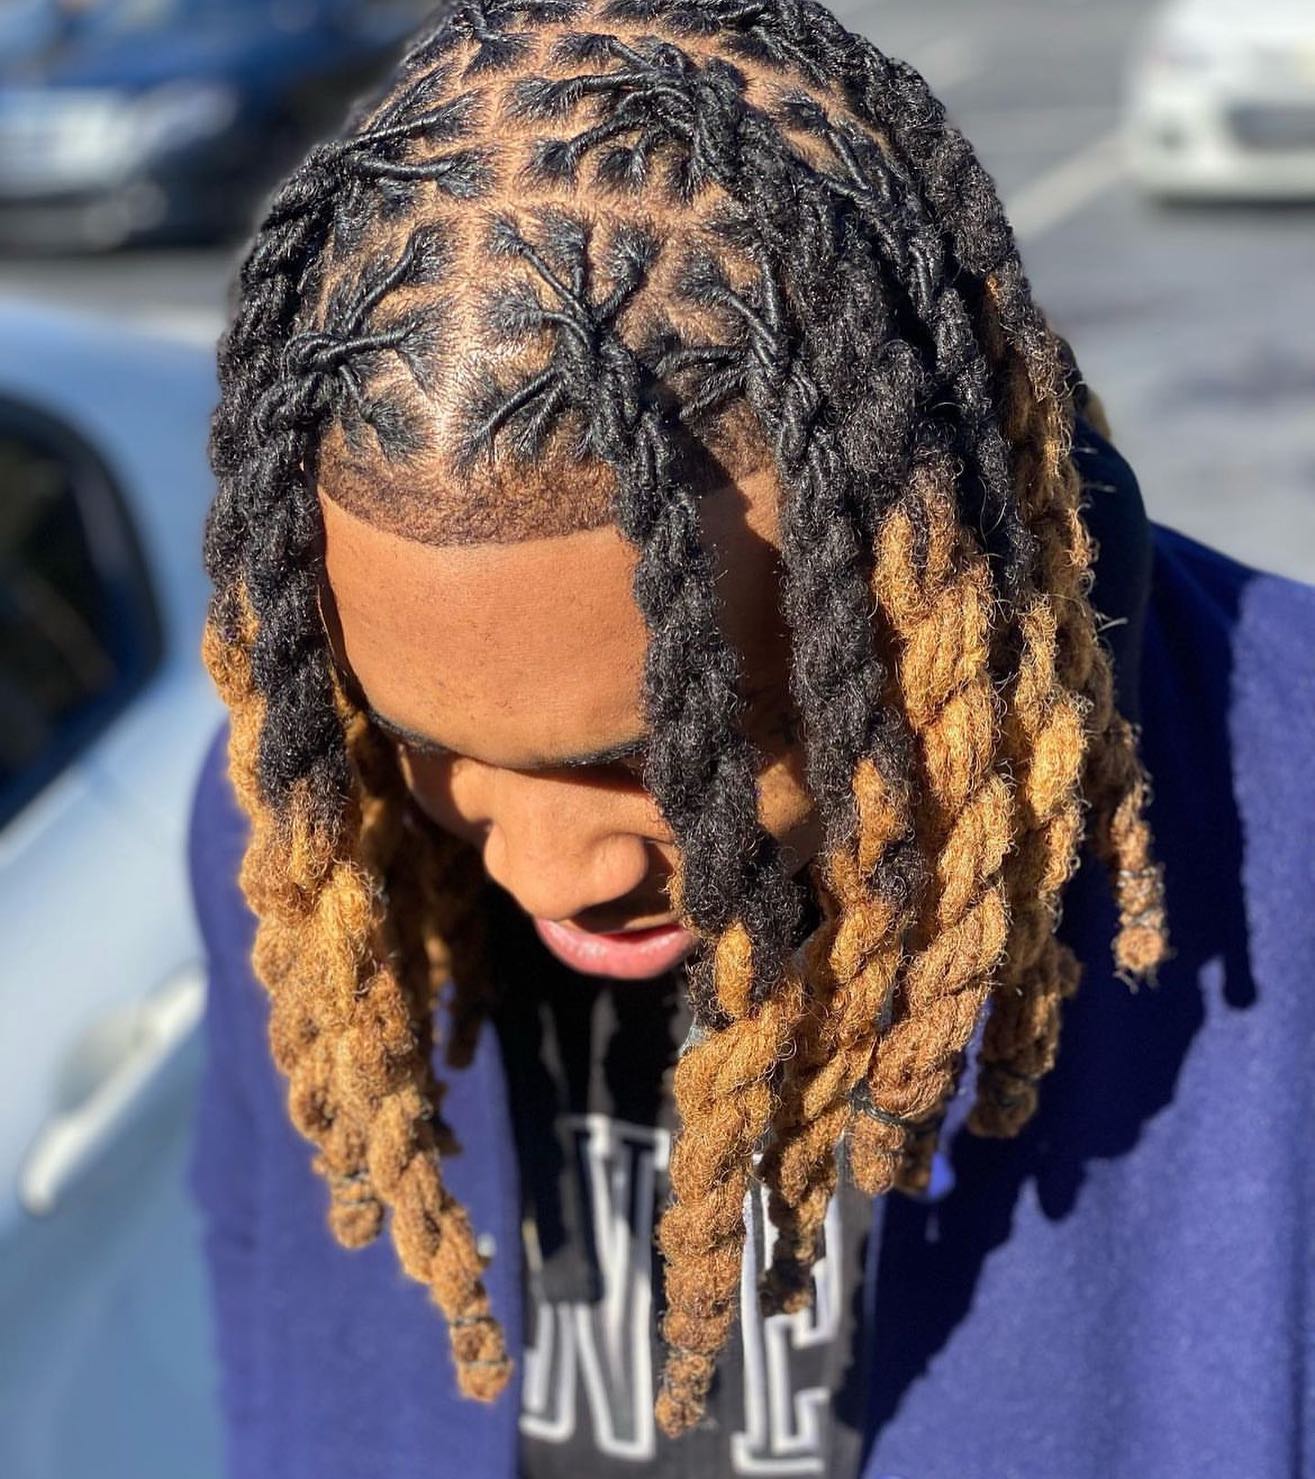 Image of Dreads With Blonde Tips inspired by Dreadlocks Hairstyles for Men